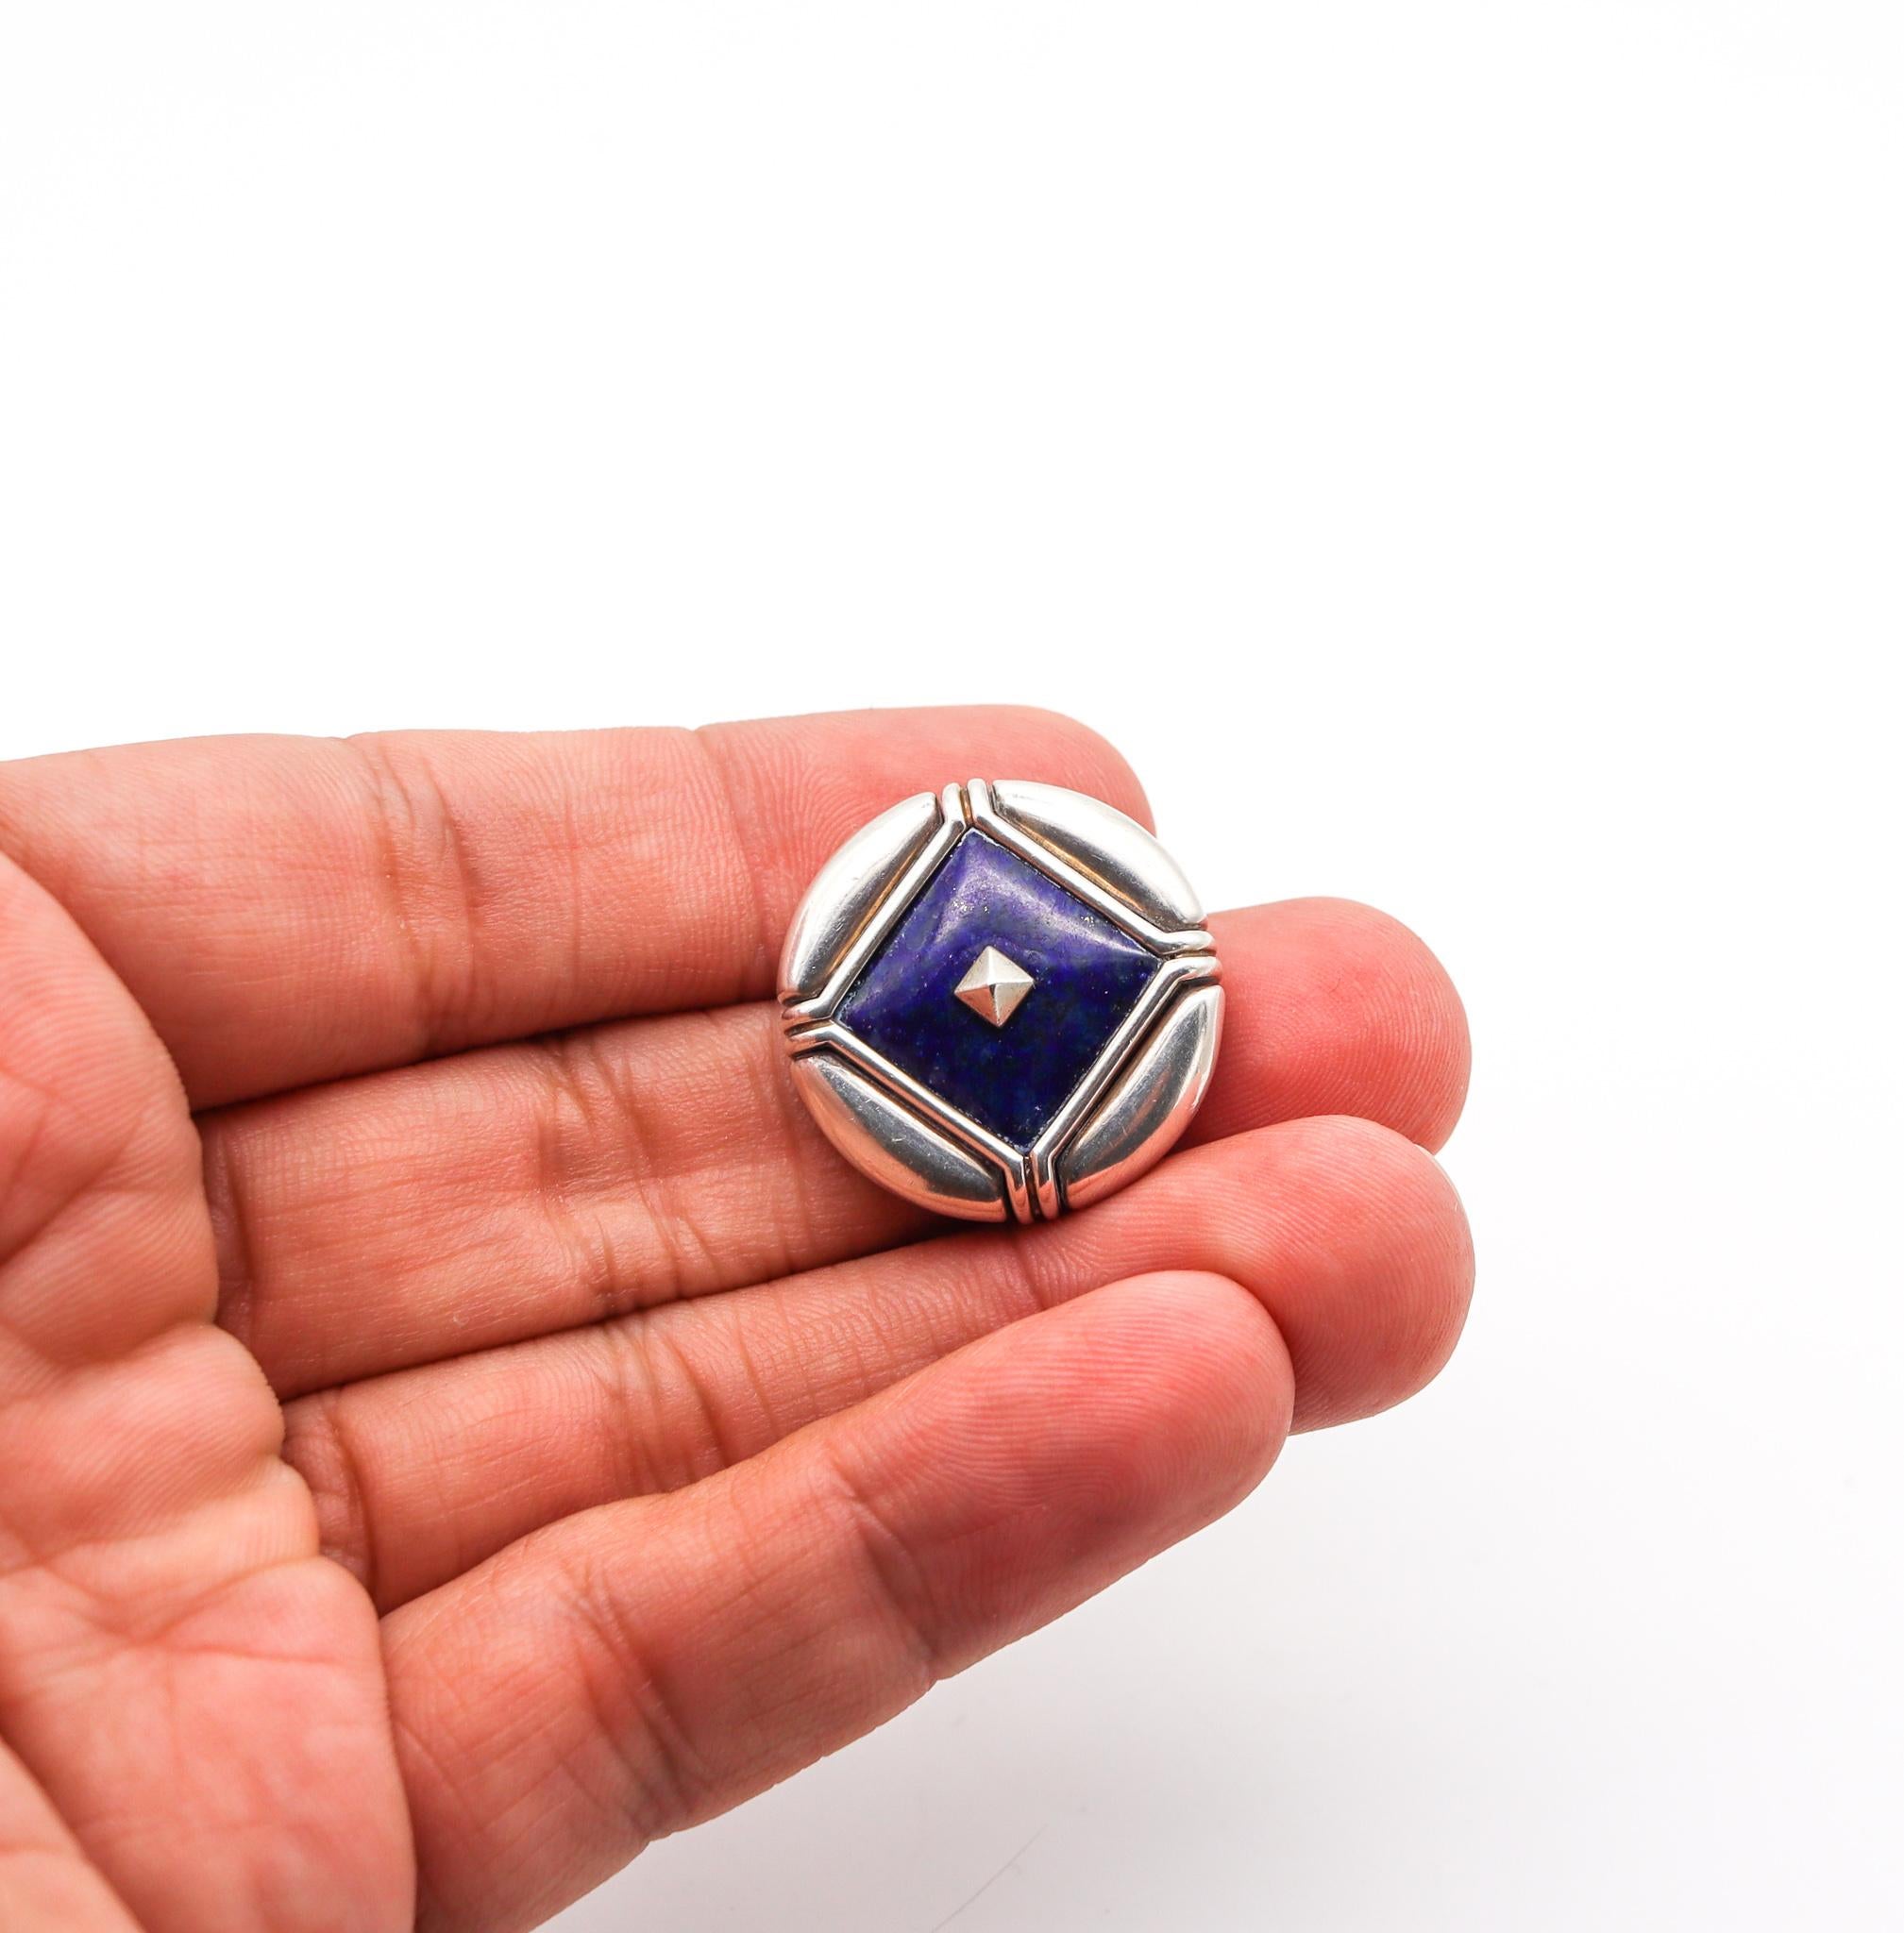 Women's Bvlgari 1970 Roma Geometric Round Brooch in Sterling Silver with Lapis Lazuli